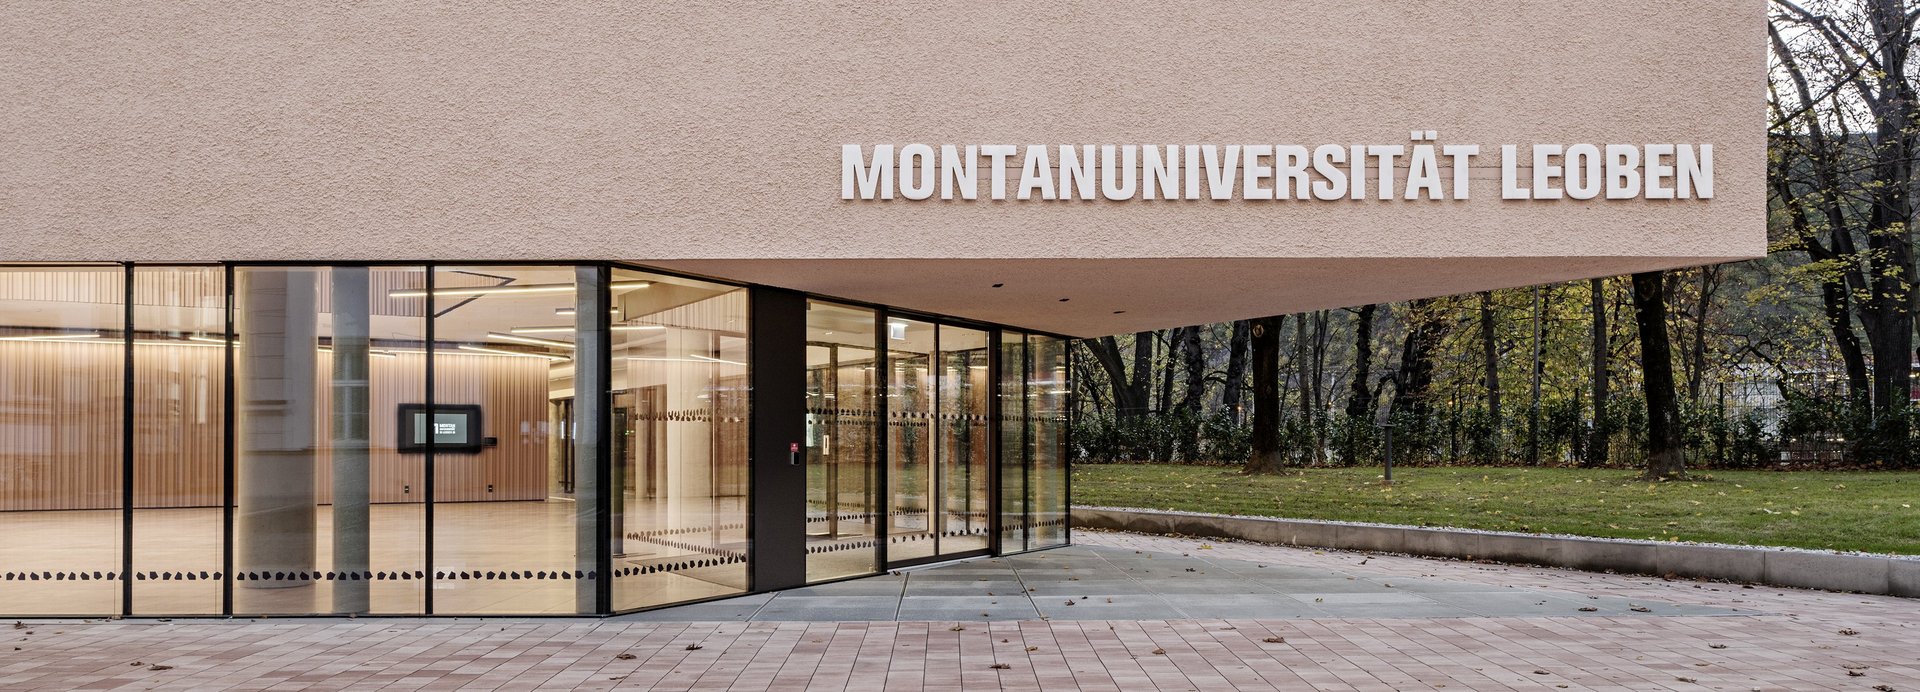 Entrance to the study centre of the service departments of the Montanuniversität Leoben.